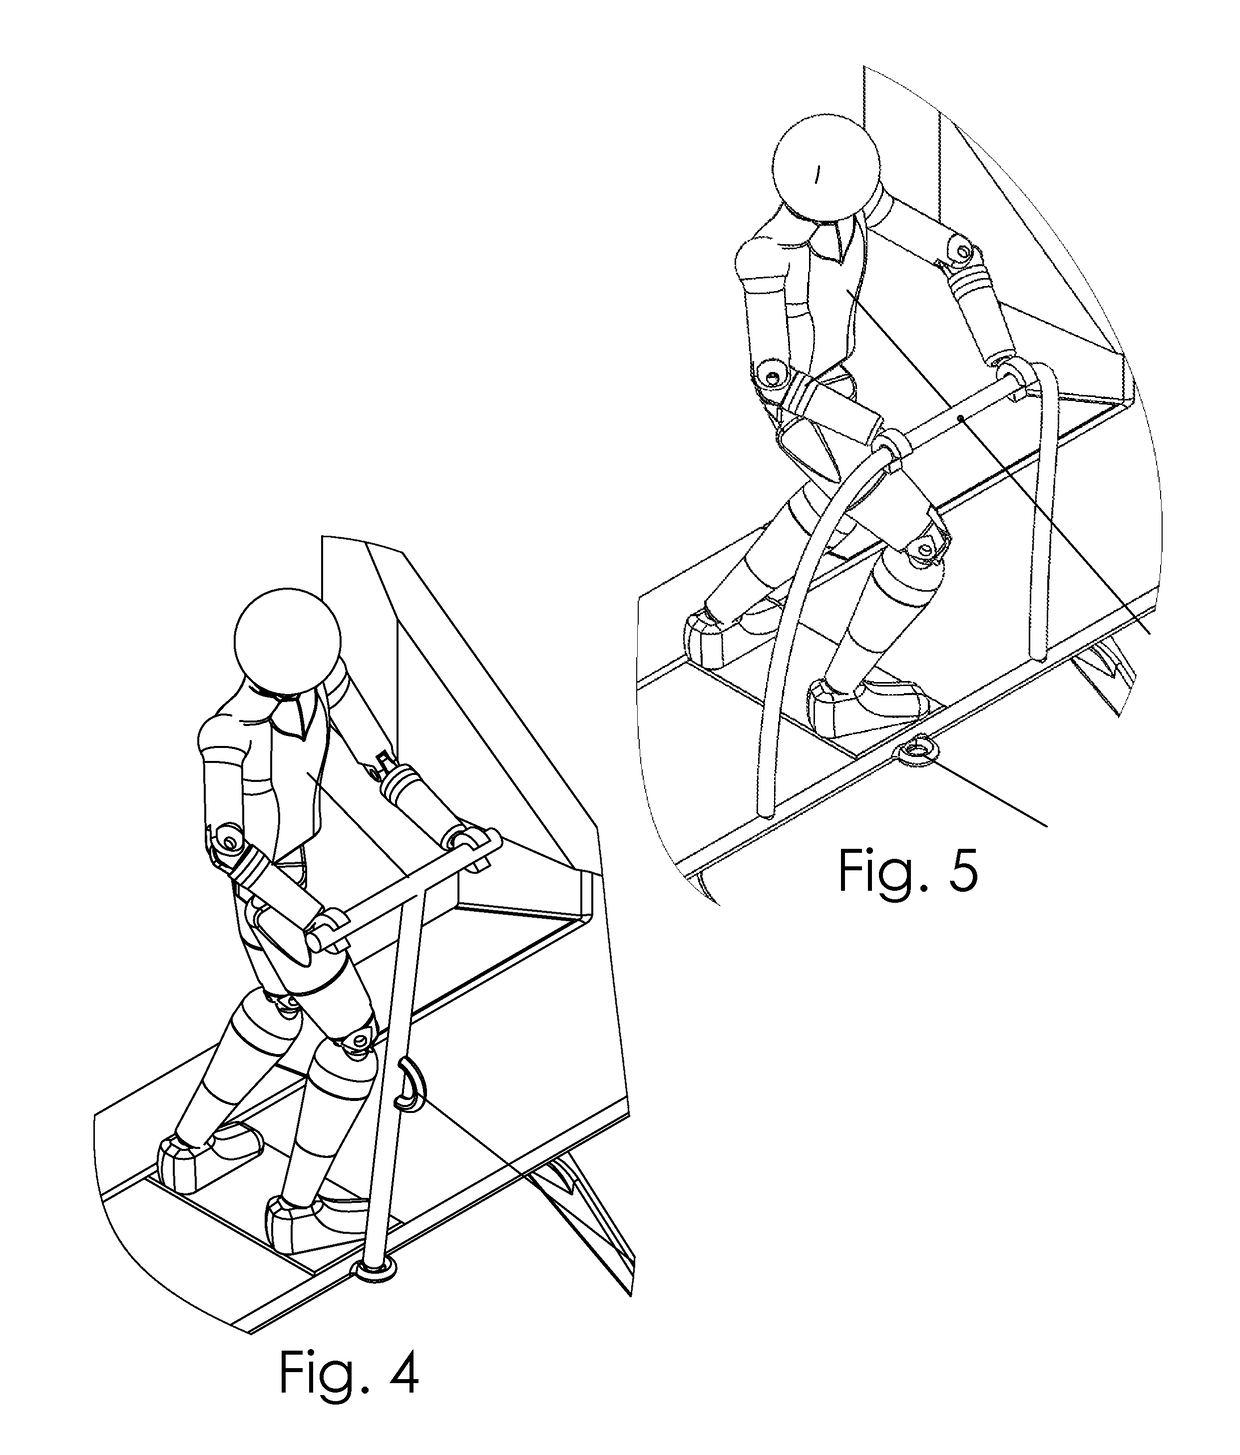 System for airboarding behind an aircraft